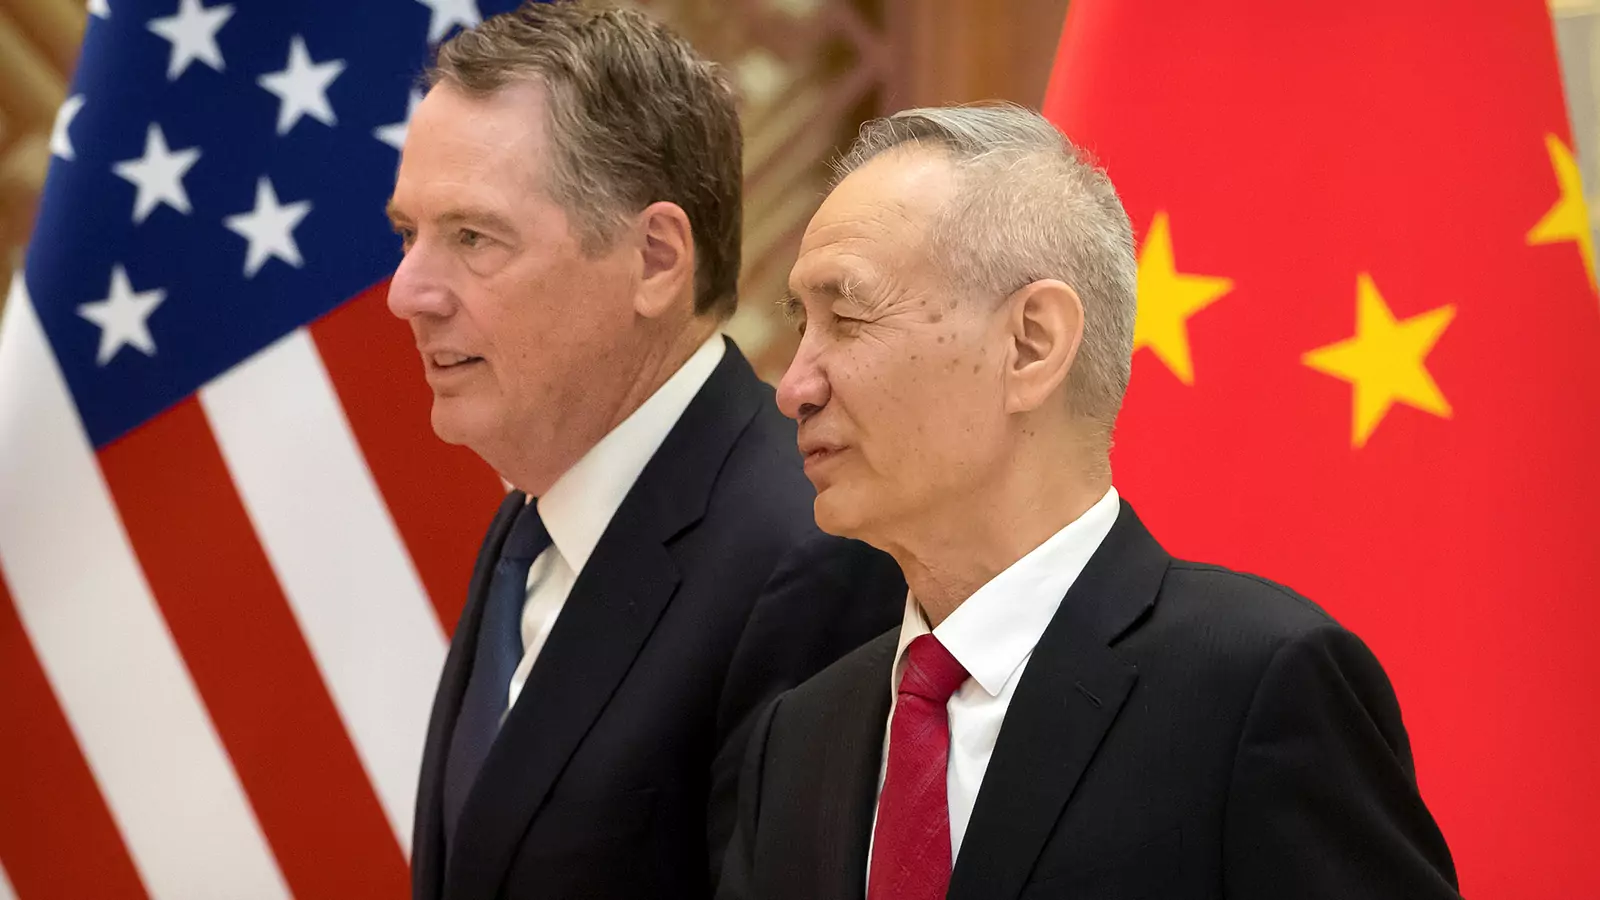 U.S. Trade Representative Robert Lighthizer, left, and Chinese Vice Premier Liu He arrive for a group photo at the Diaoyutai State Guesthouse in Beijing, China February 15, 2019.